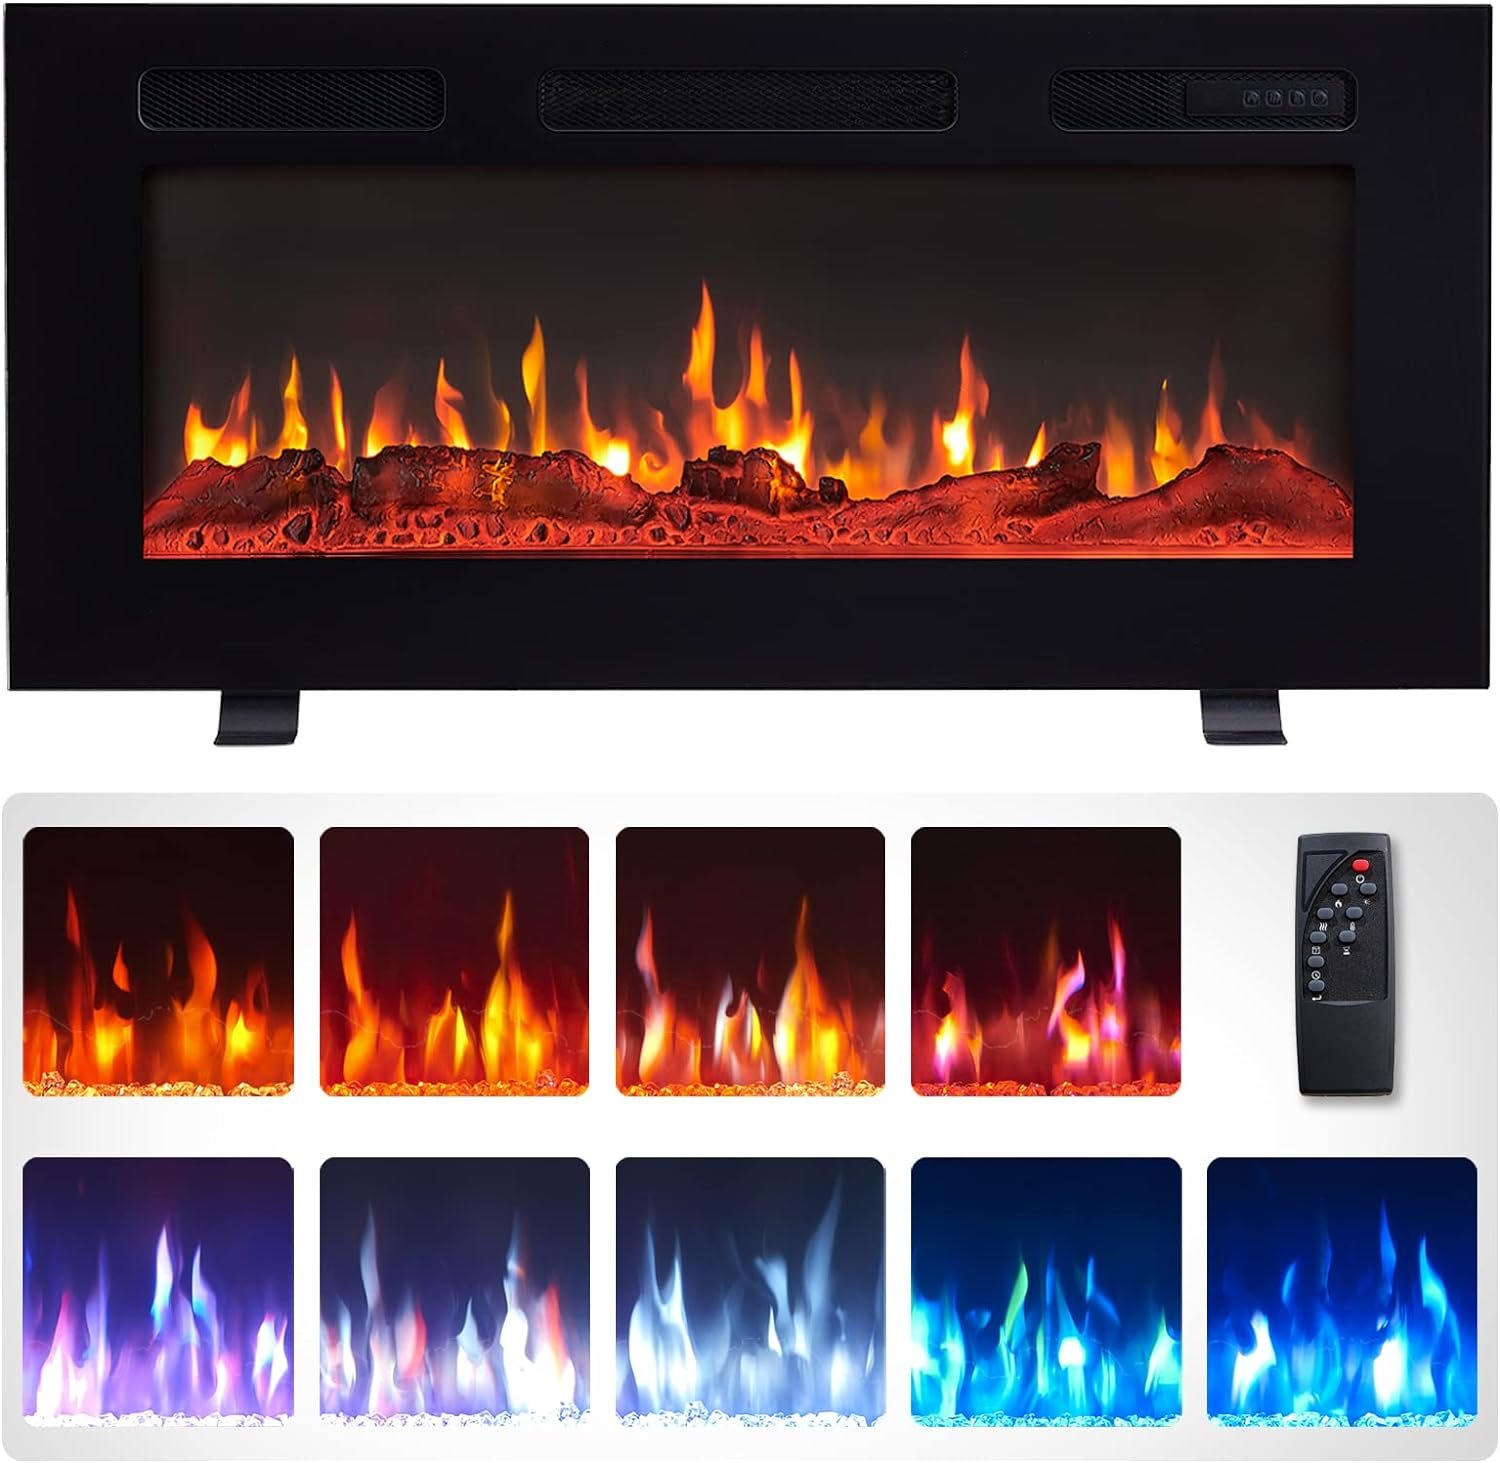 Efiretric Grace 36"W 3 in 1 Electric Fireplace (EF449), Freestanding, Wall Mounted